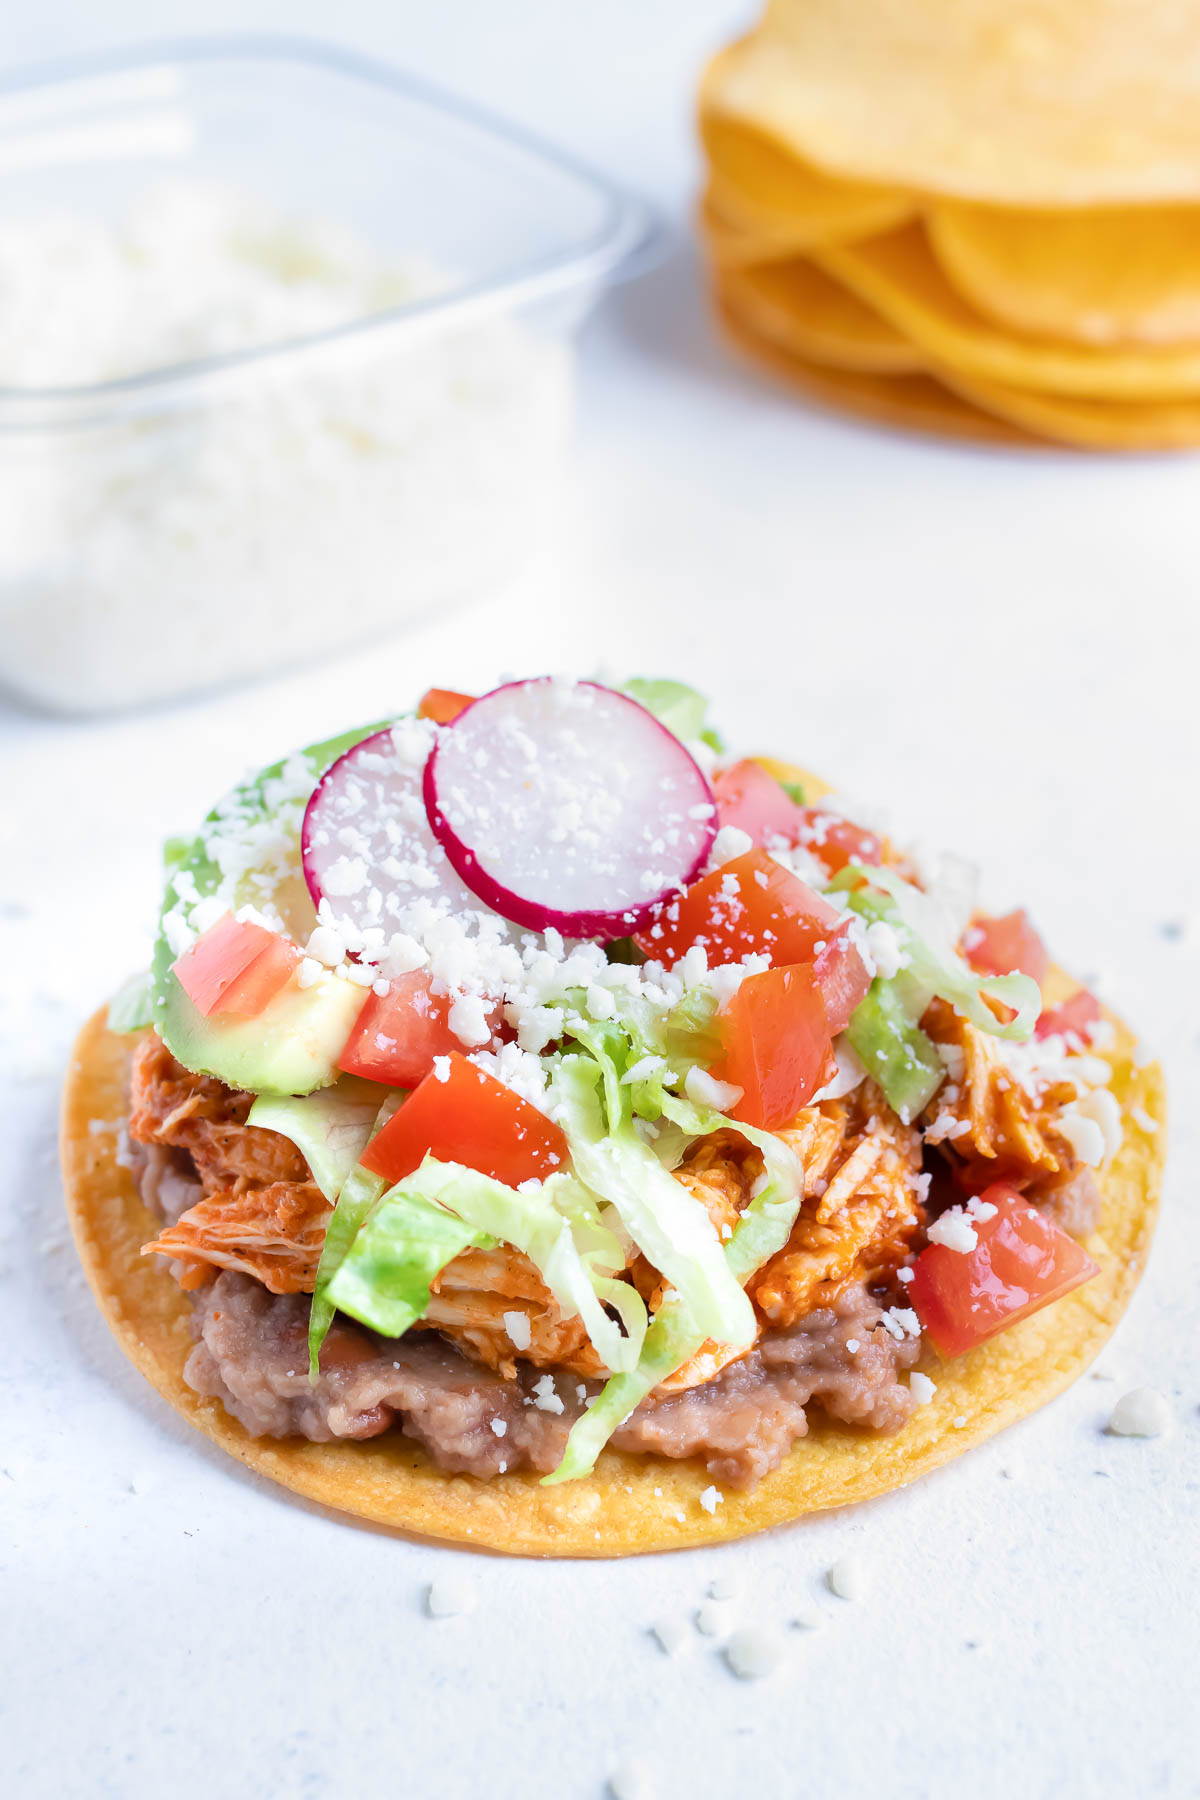 Sliced raddishes are added to the tostada.